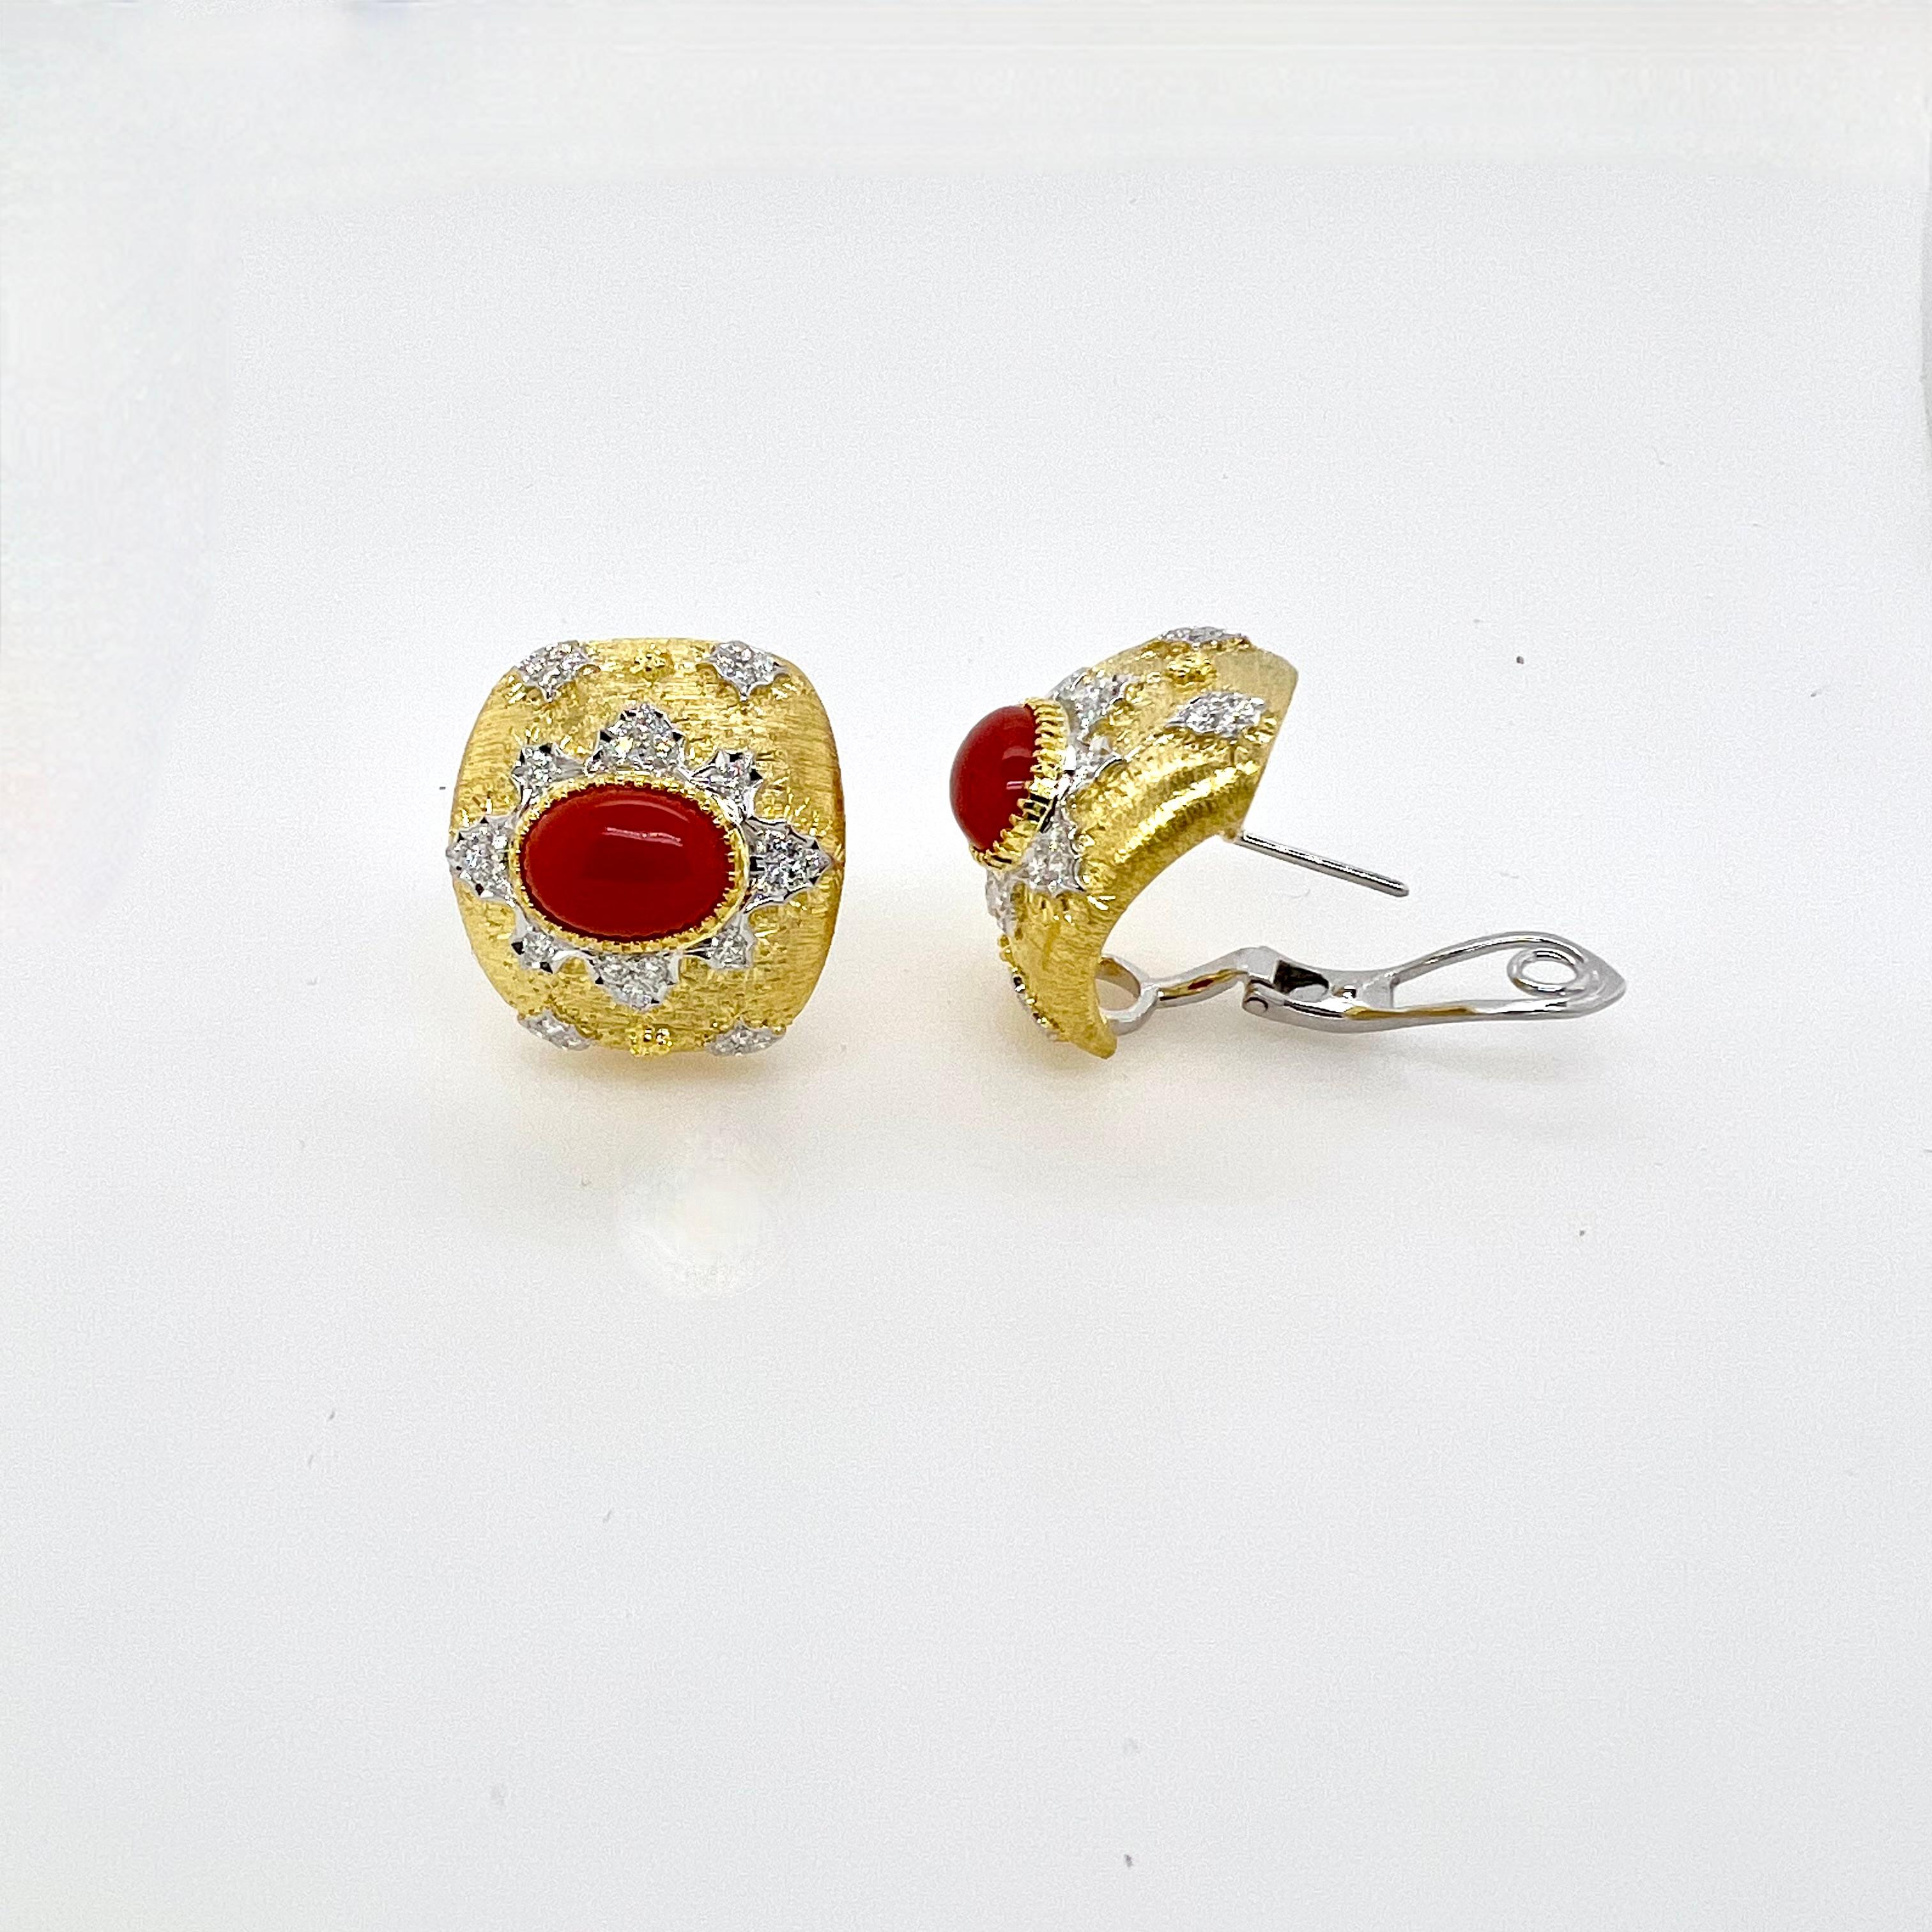 This stunning handmade coral earrings in 18k yellow gold will accentuate any outfit and make you the talk of the town!   The meticulous details involved in making this earrings truly shows.   The vibrant corals are contrasted by the textured,